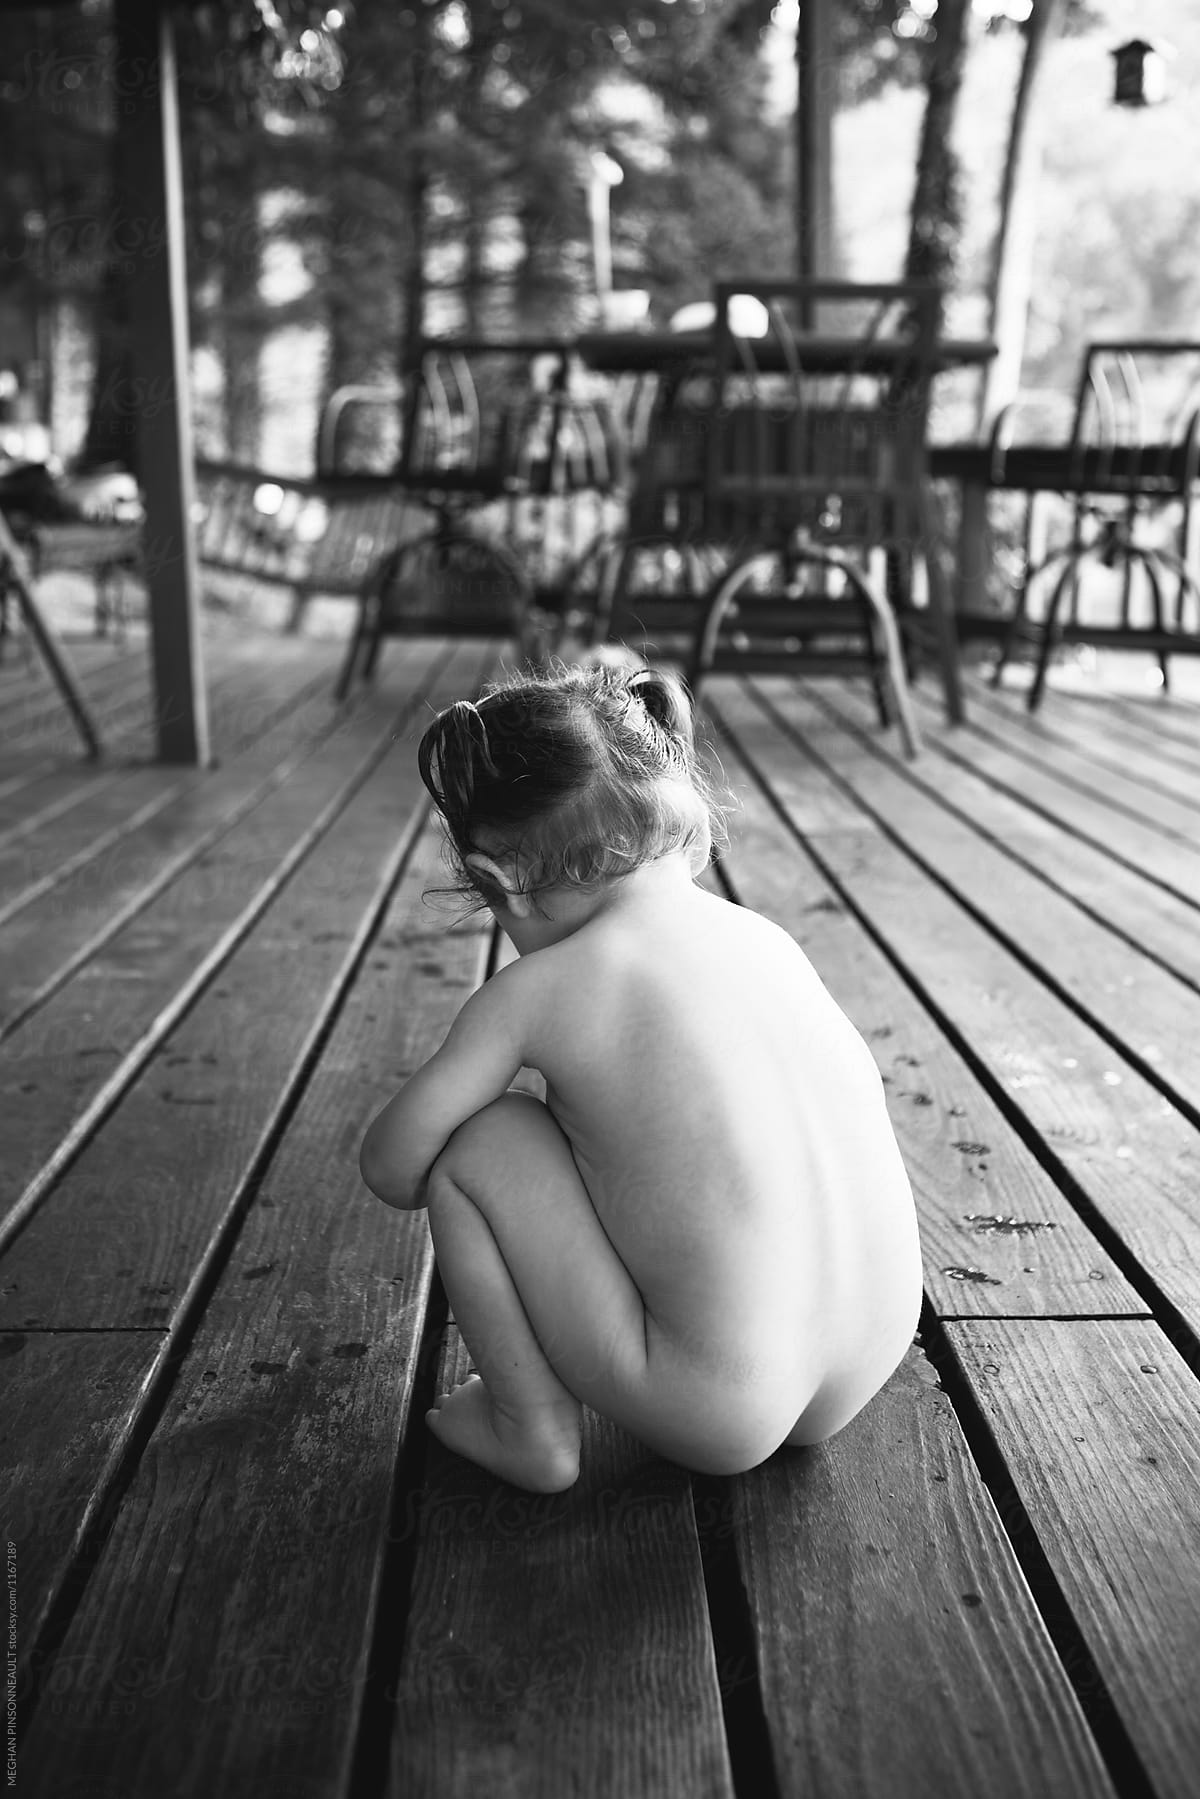 Naked Toddler Plays On Outdoor Lake Deck by MEGHAN PINSONNEAULT.